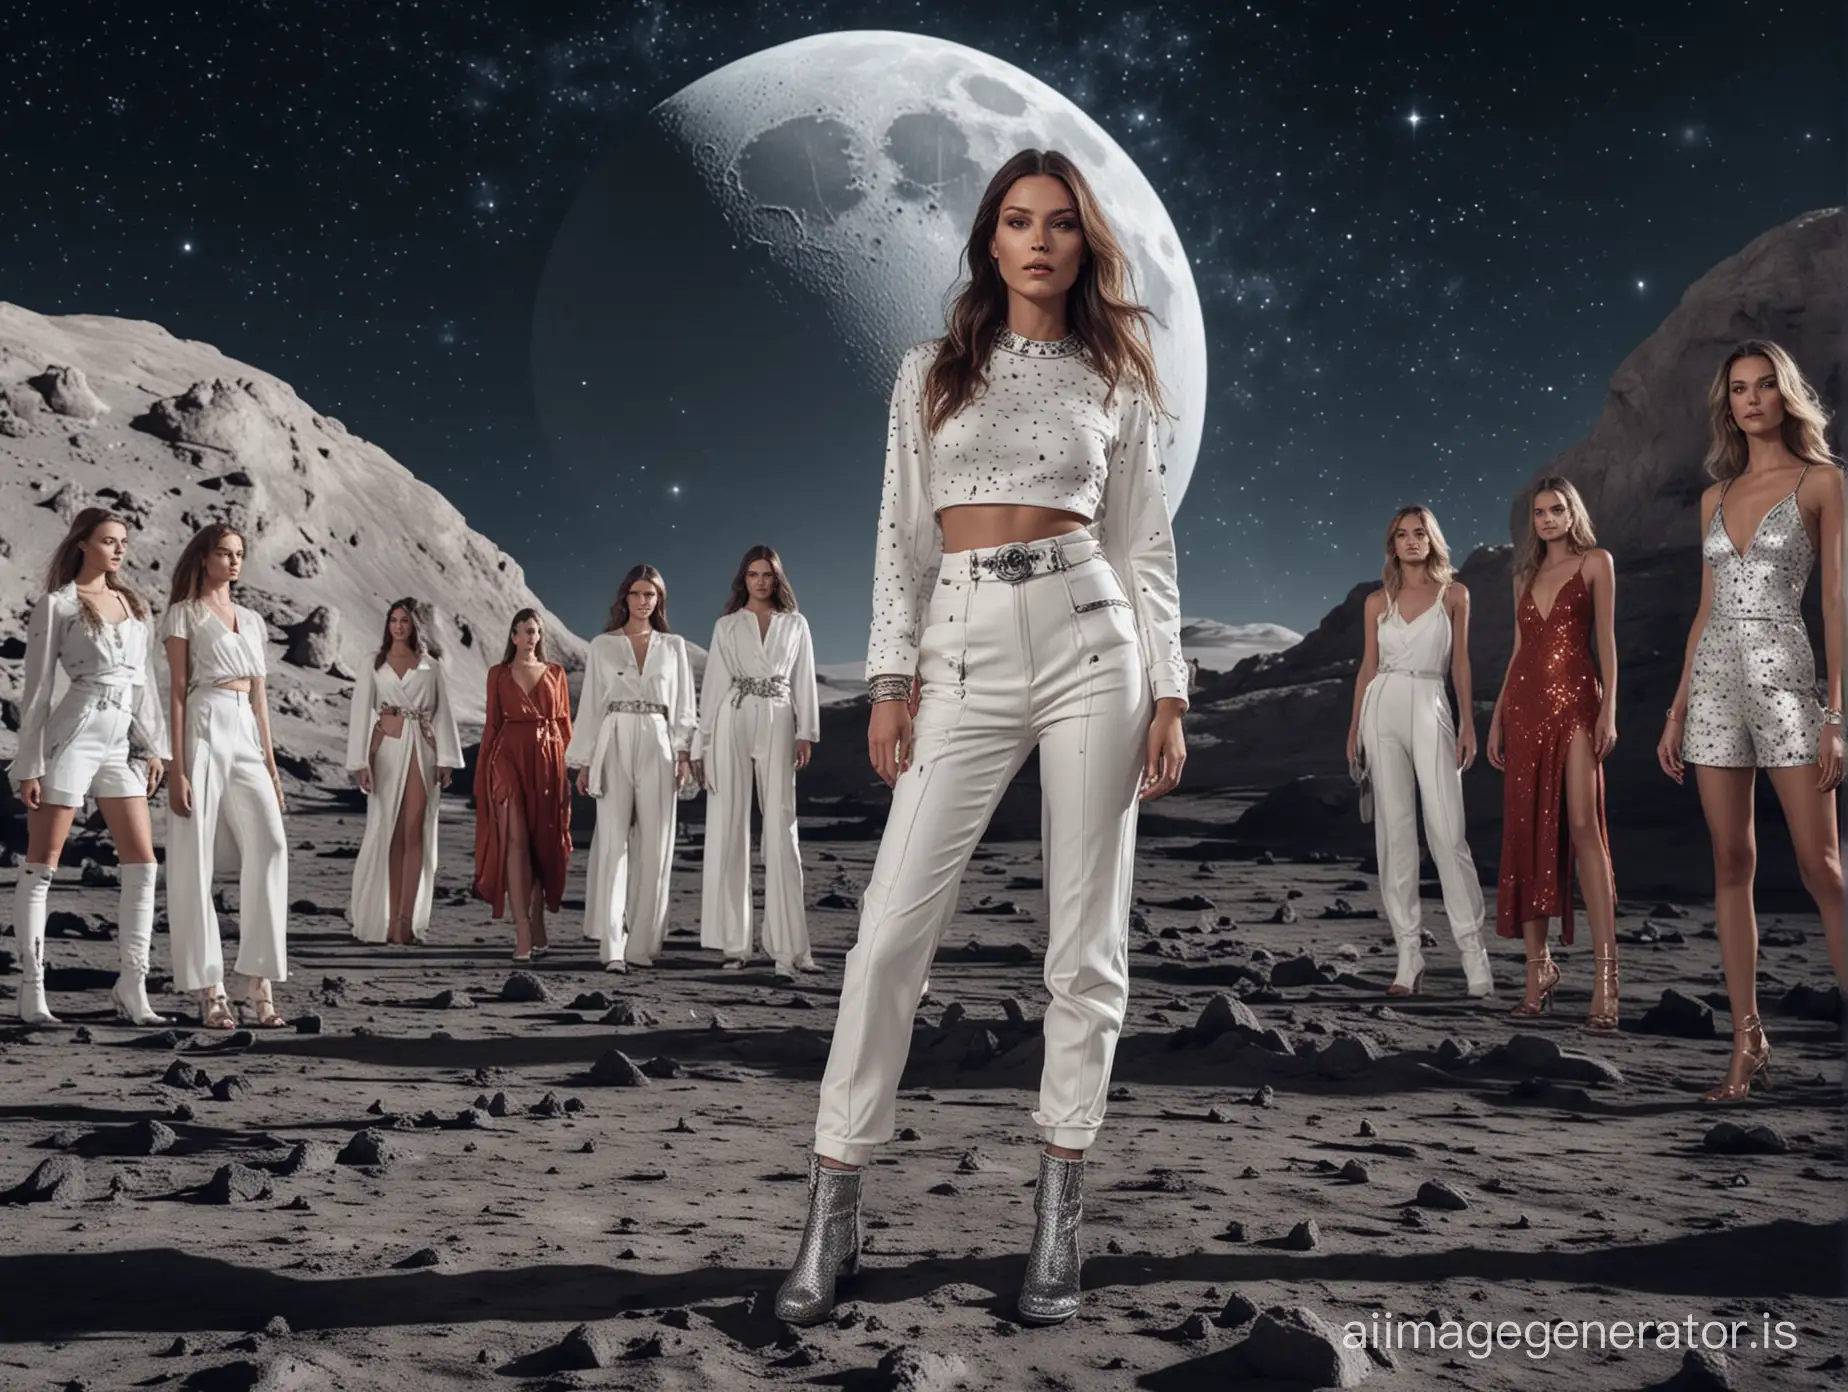 Supermodel fashion show on the moon with stars in the background